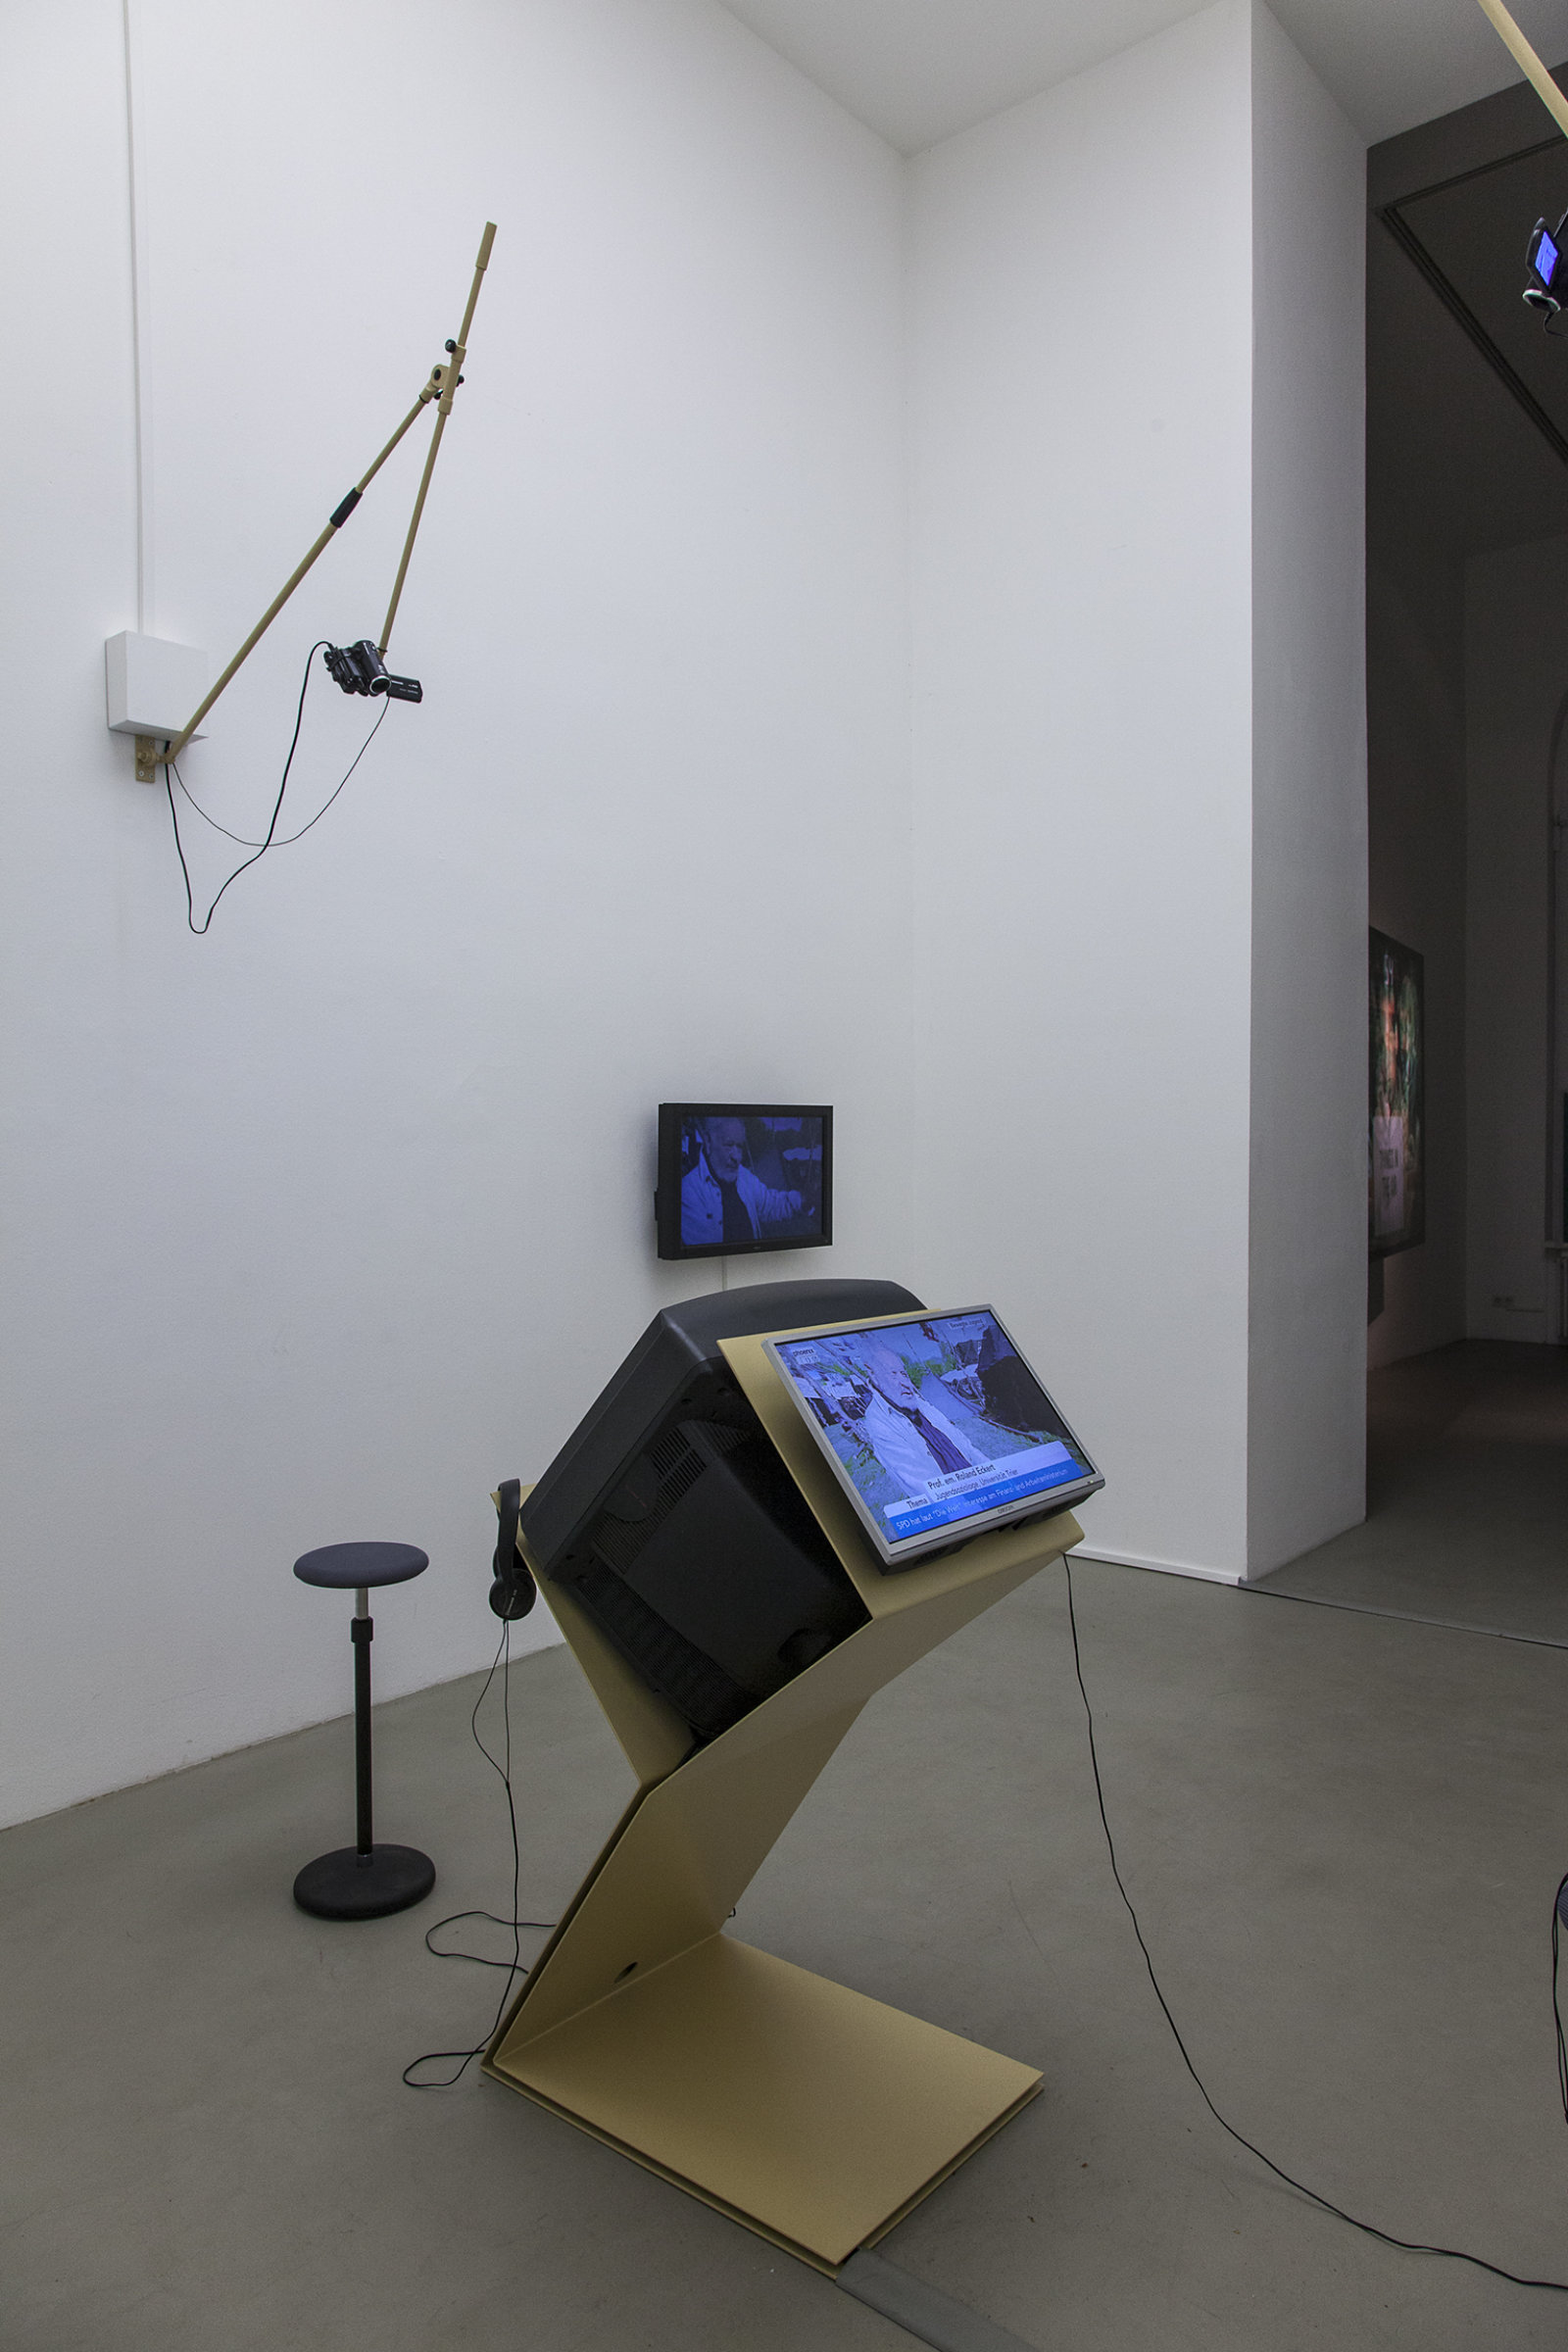 Judy Radul, A CONTAINER CONTAINING NOT ONE TV, 2013, powder coated steel, CRT television, 2 flatscreen televisions, local television signal, remote control, two live video cameras, maxmsp patch, dimensions variable. Installation view, This	is	Television,	Daadgalerie,	Berlin,	Germany, 2013